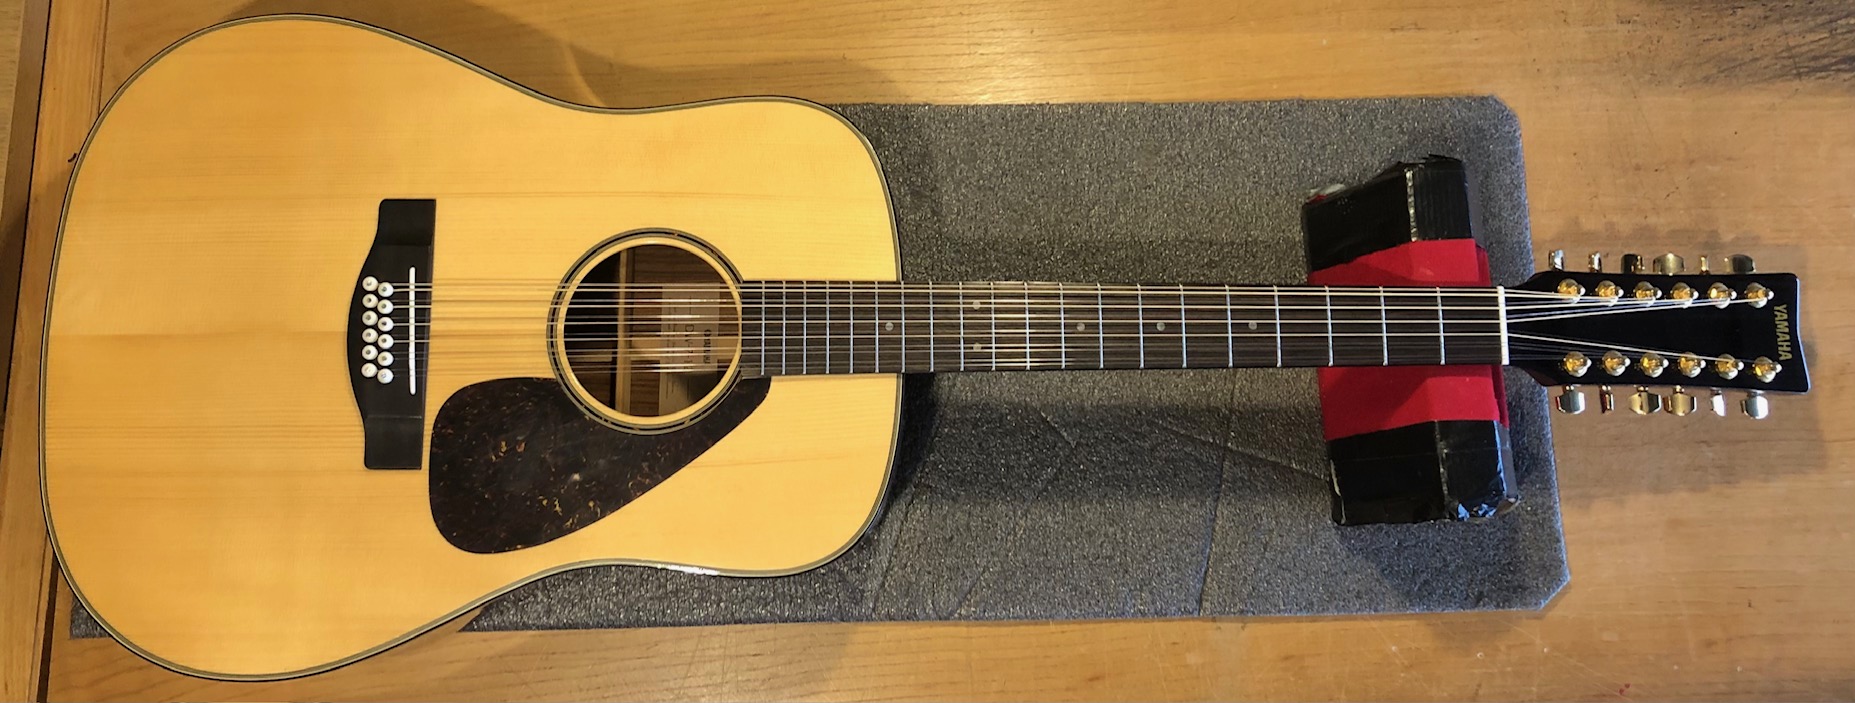 Yamaha 12 String DW 7-12 2003 Acoustic Guitar with VGV Hard Case